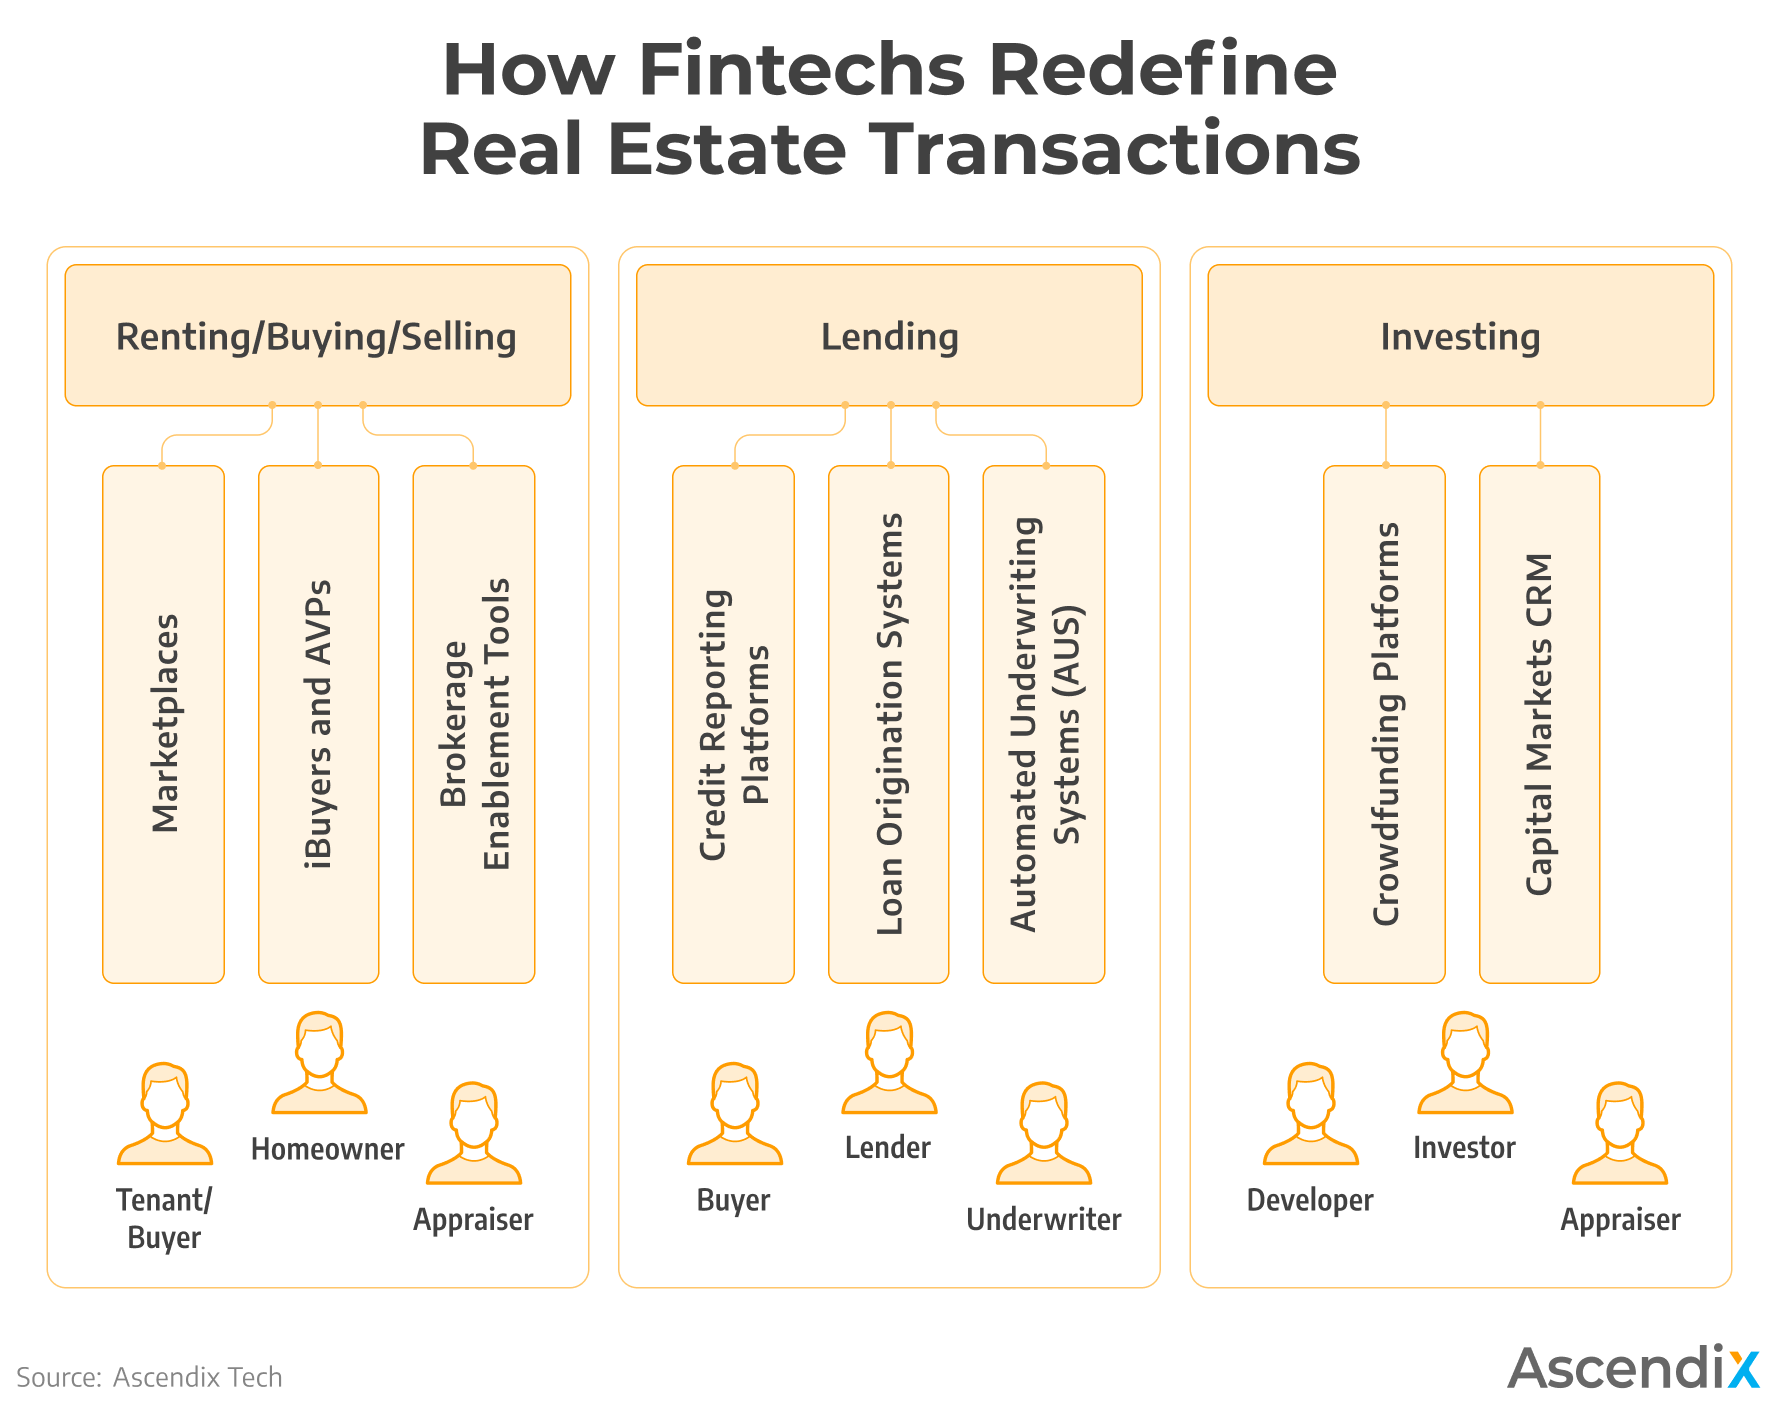 Innovation Opportunities for Fintech in Real Estate